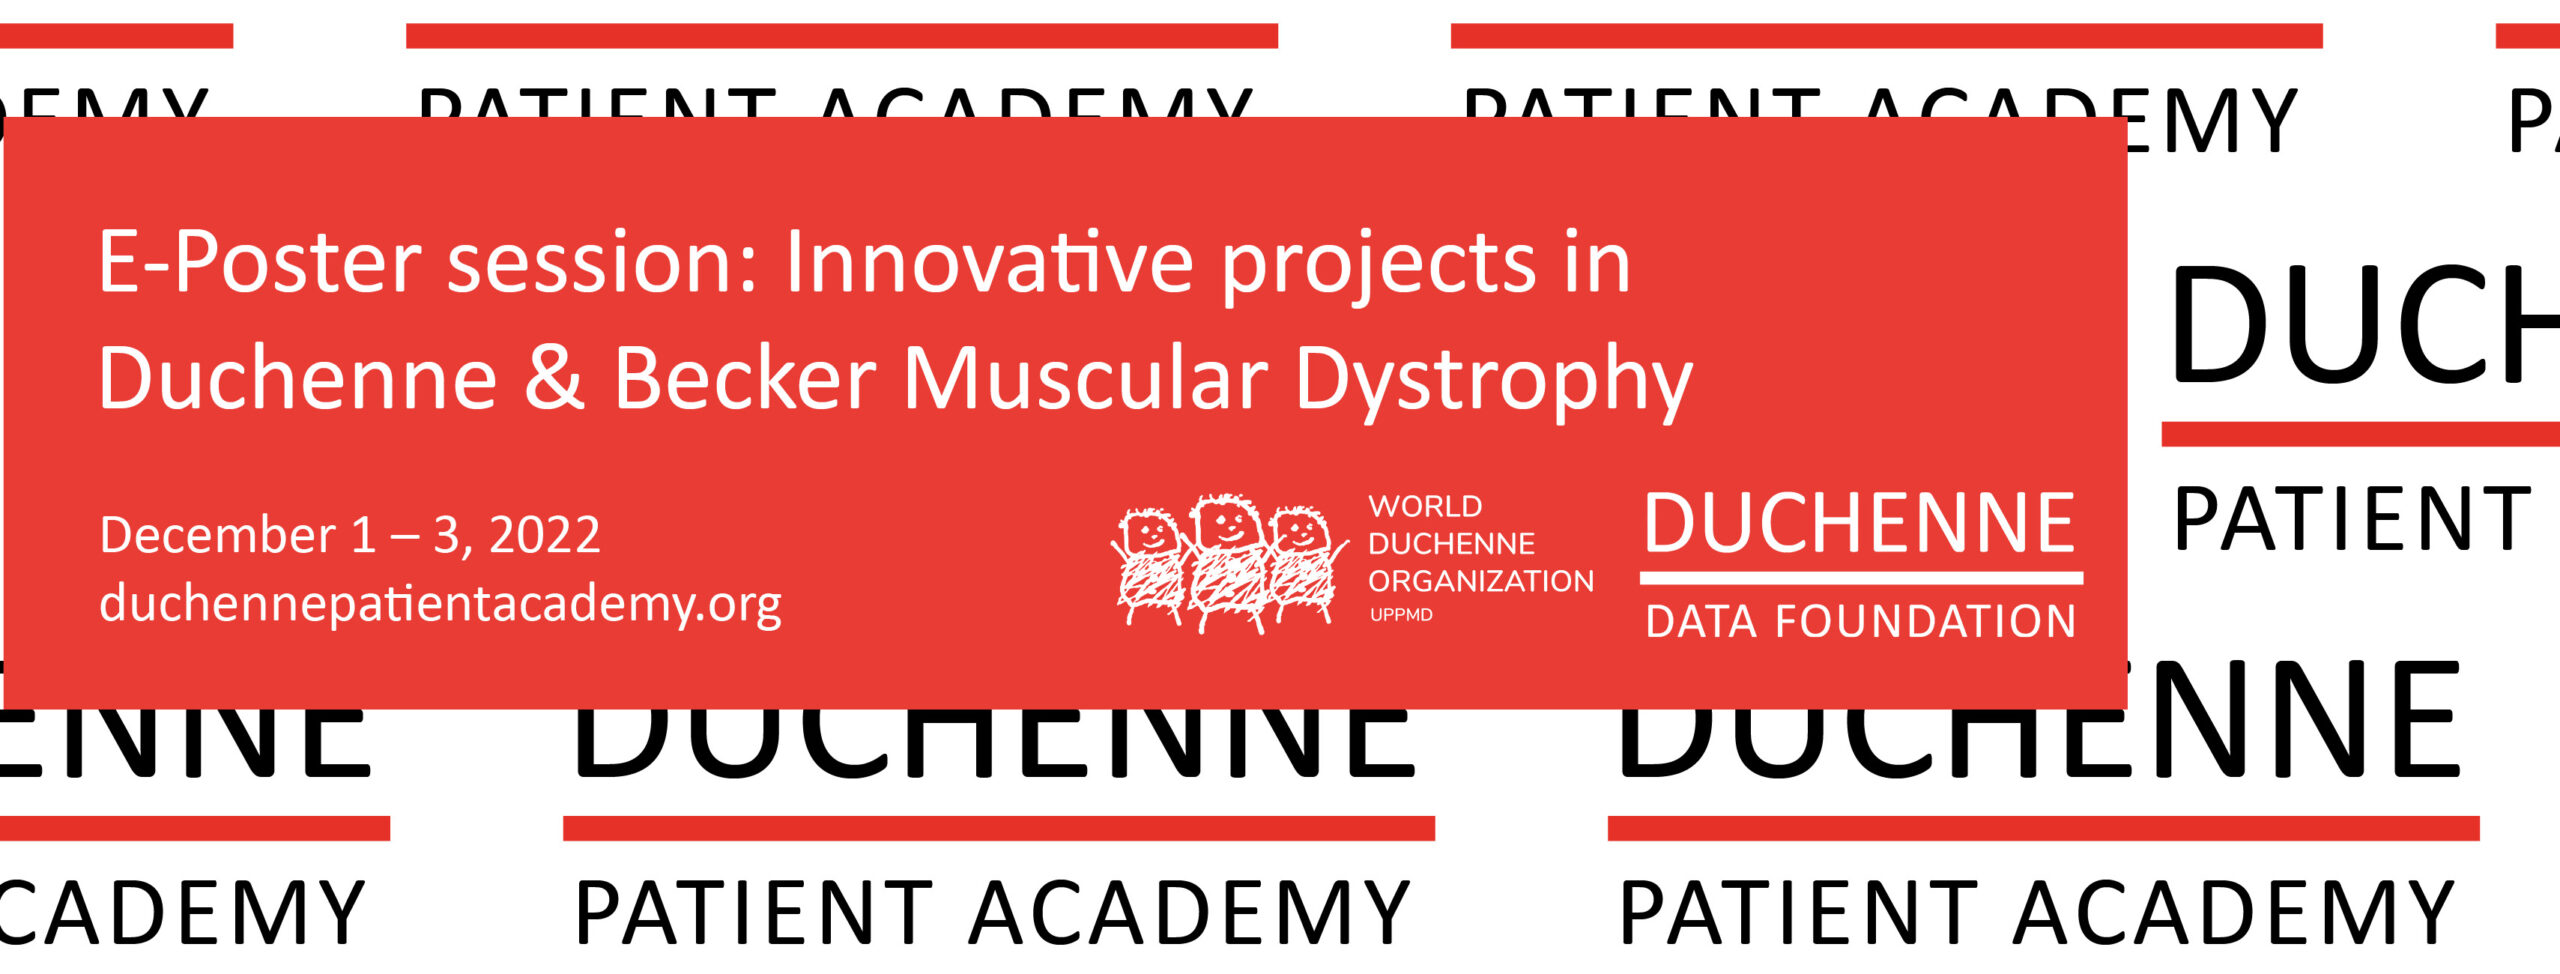 Submit Poster for Duchenne Patient Academy 2022